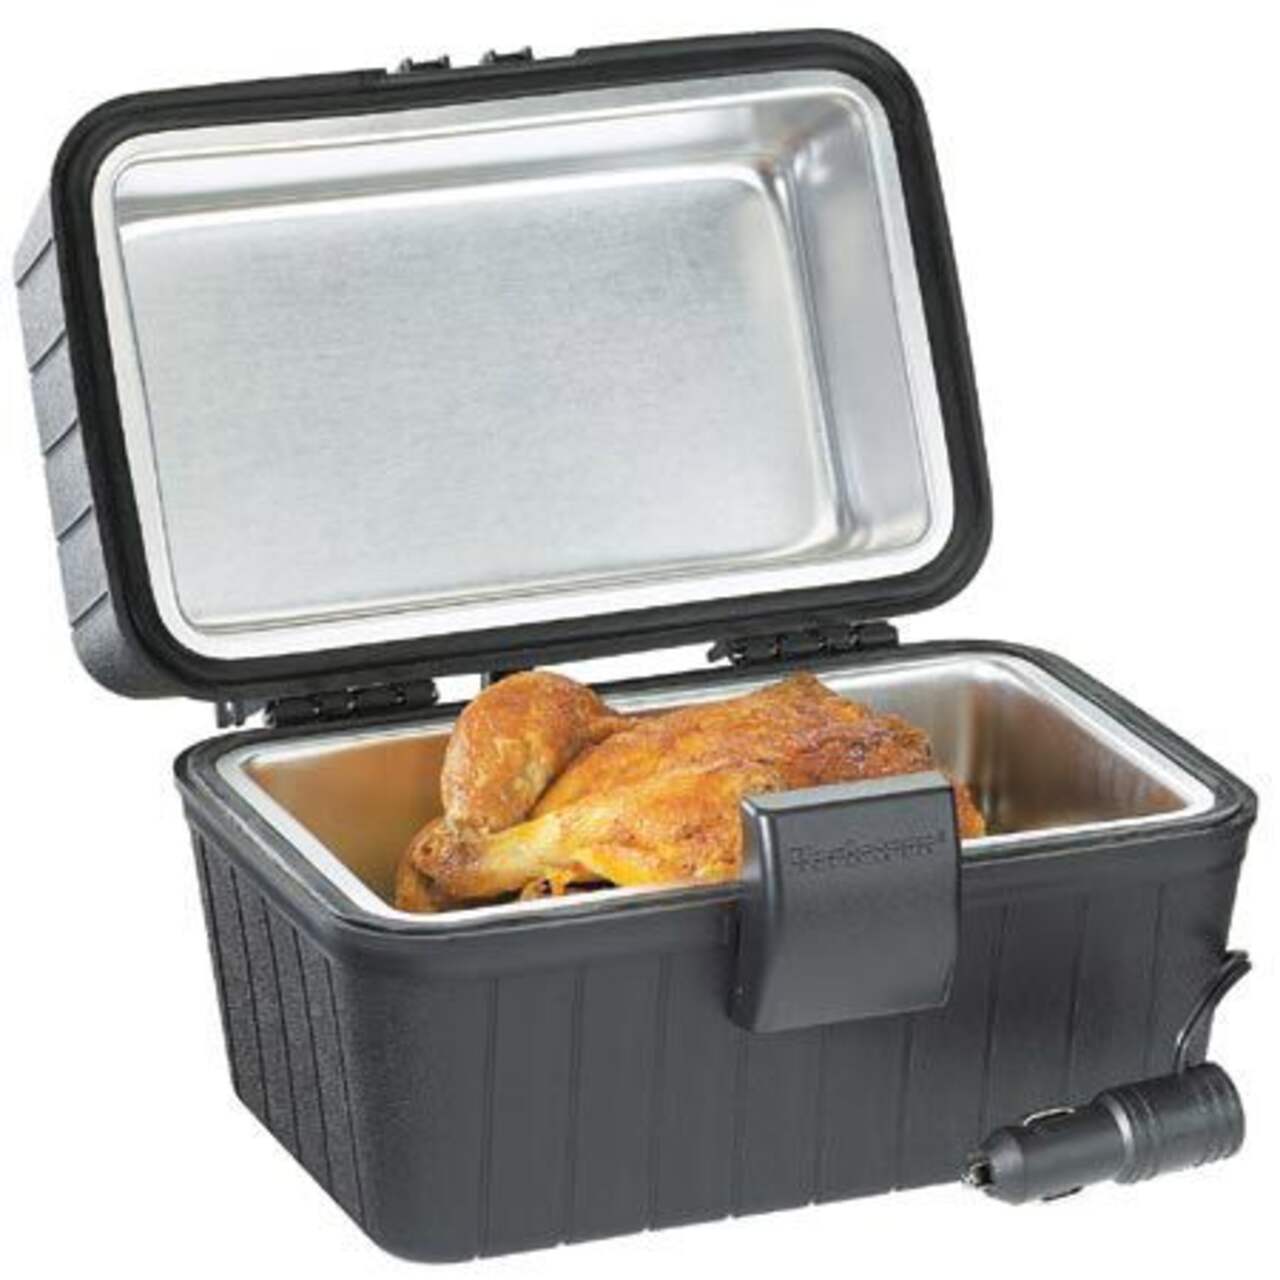 12V Portable Oven Heated Lunch Box - Eastern Watersports